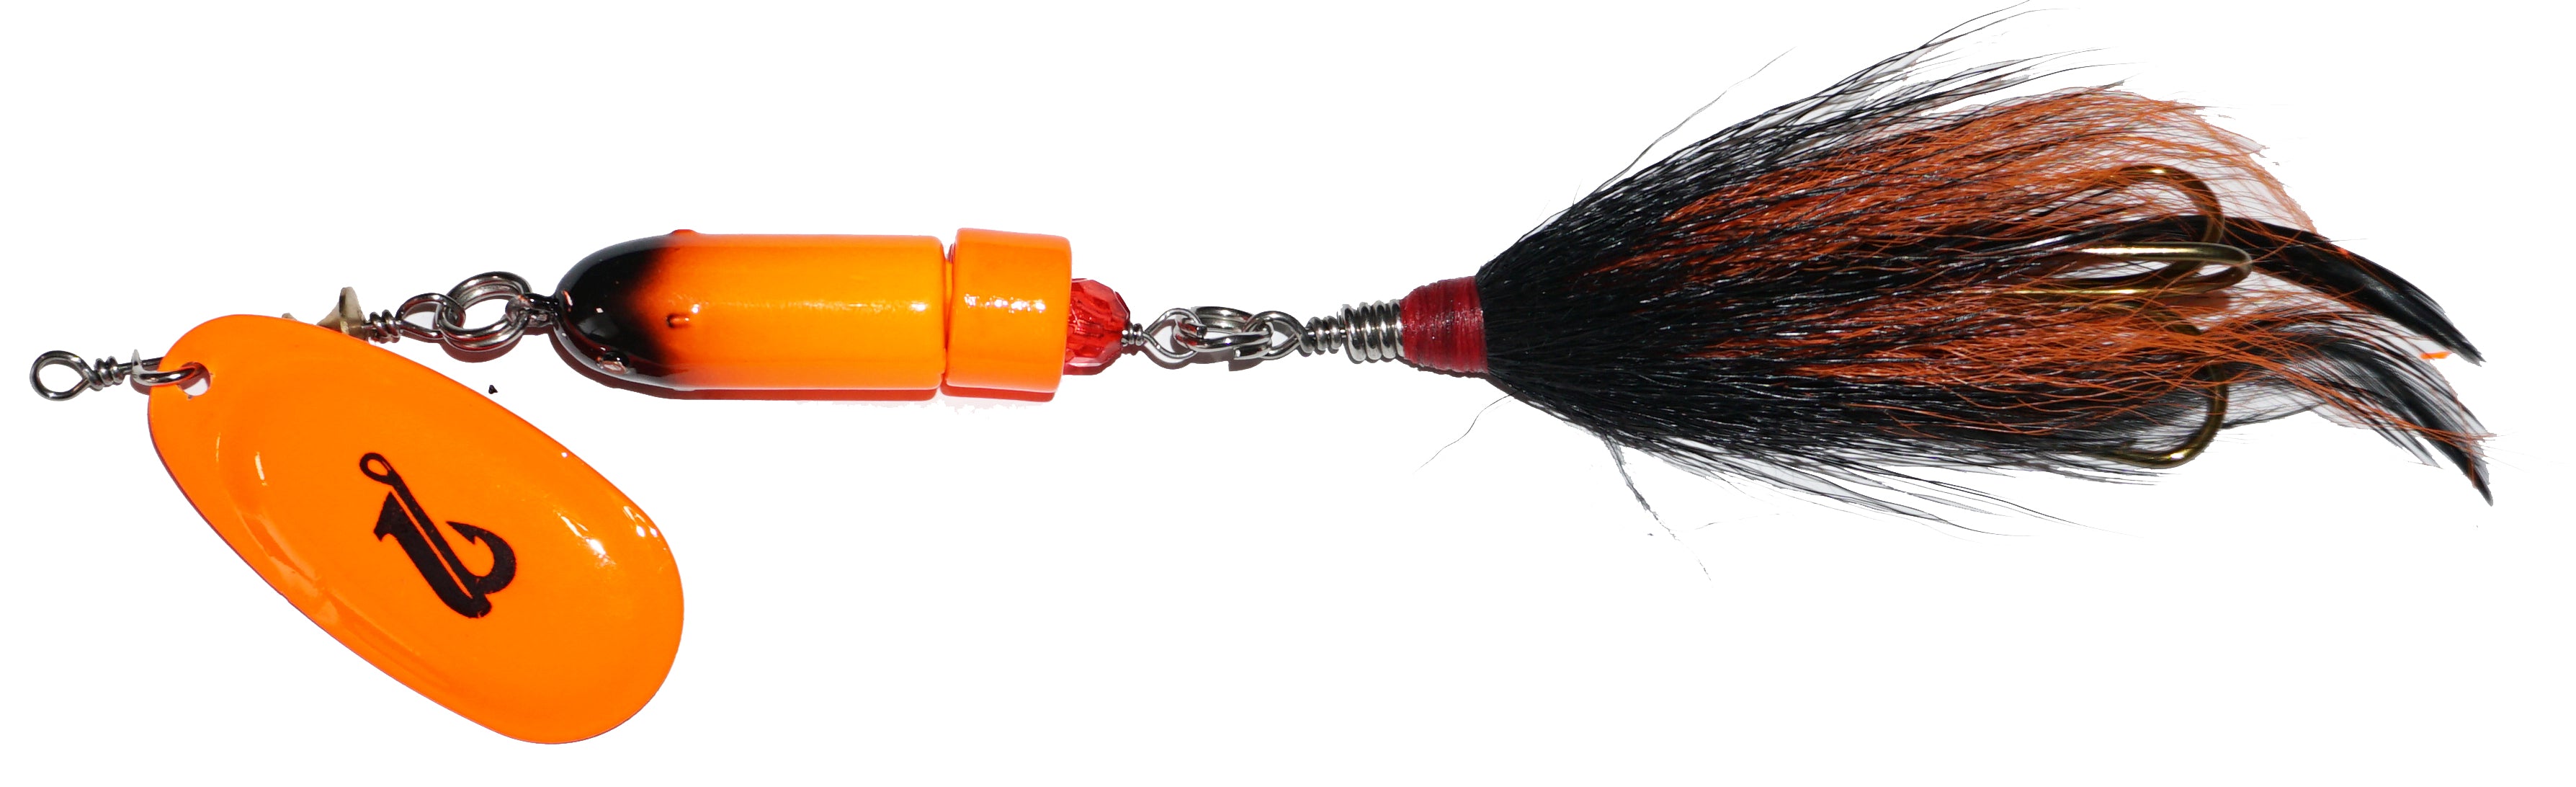 Spoon lure Spinnerbait Insect Artificial fly, insect, animals, orange png